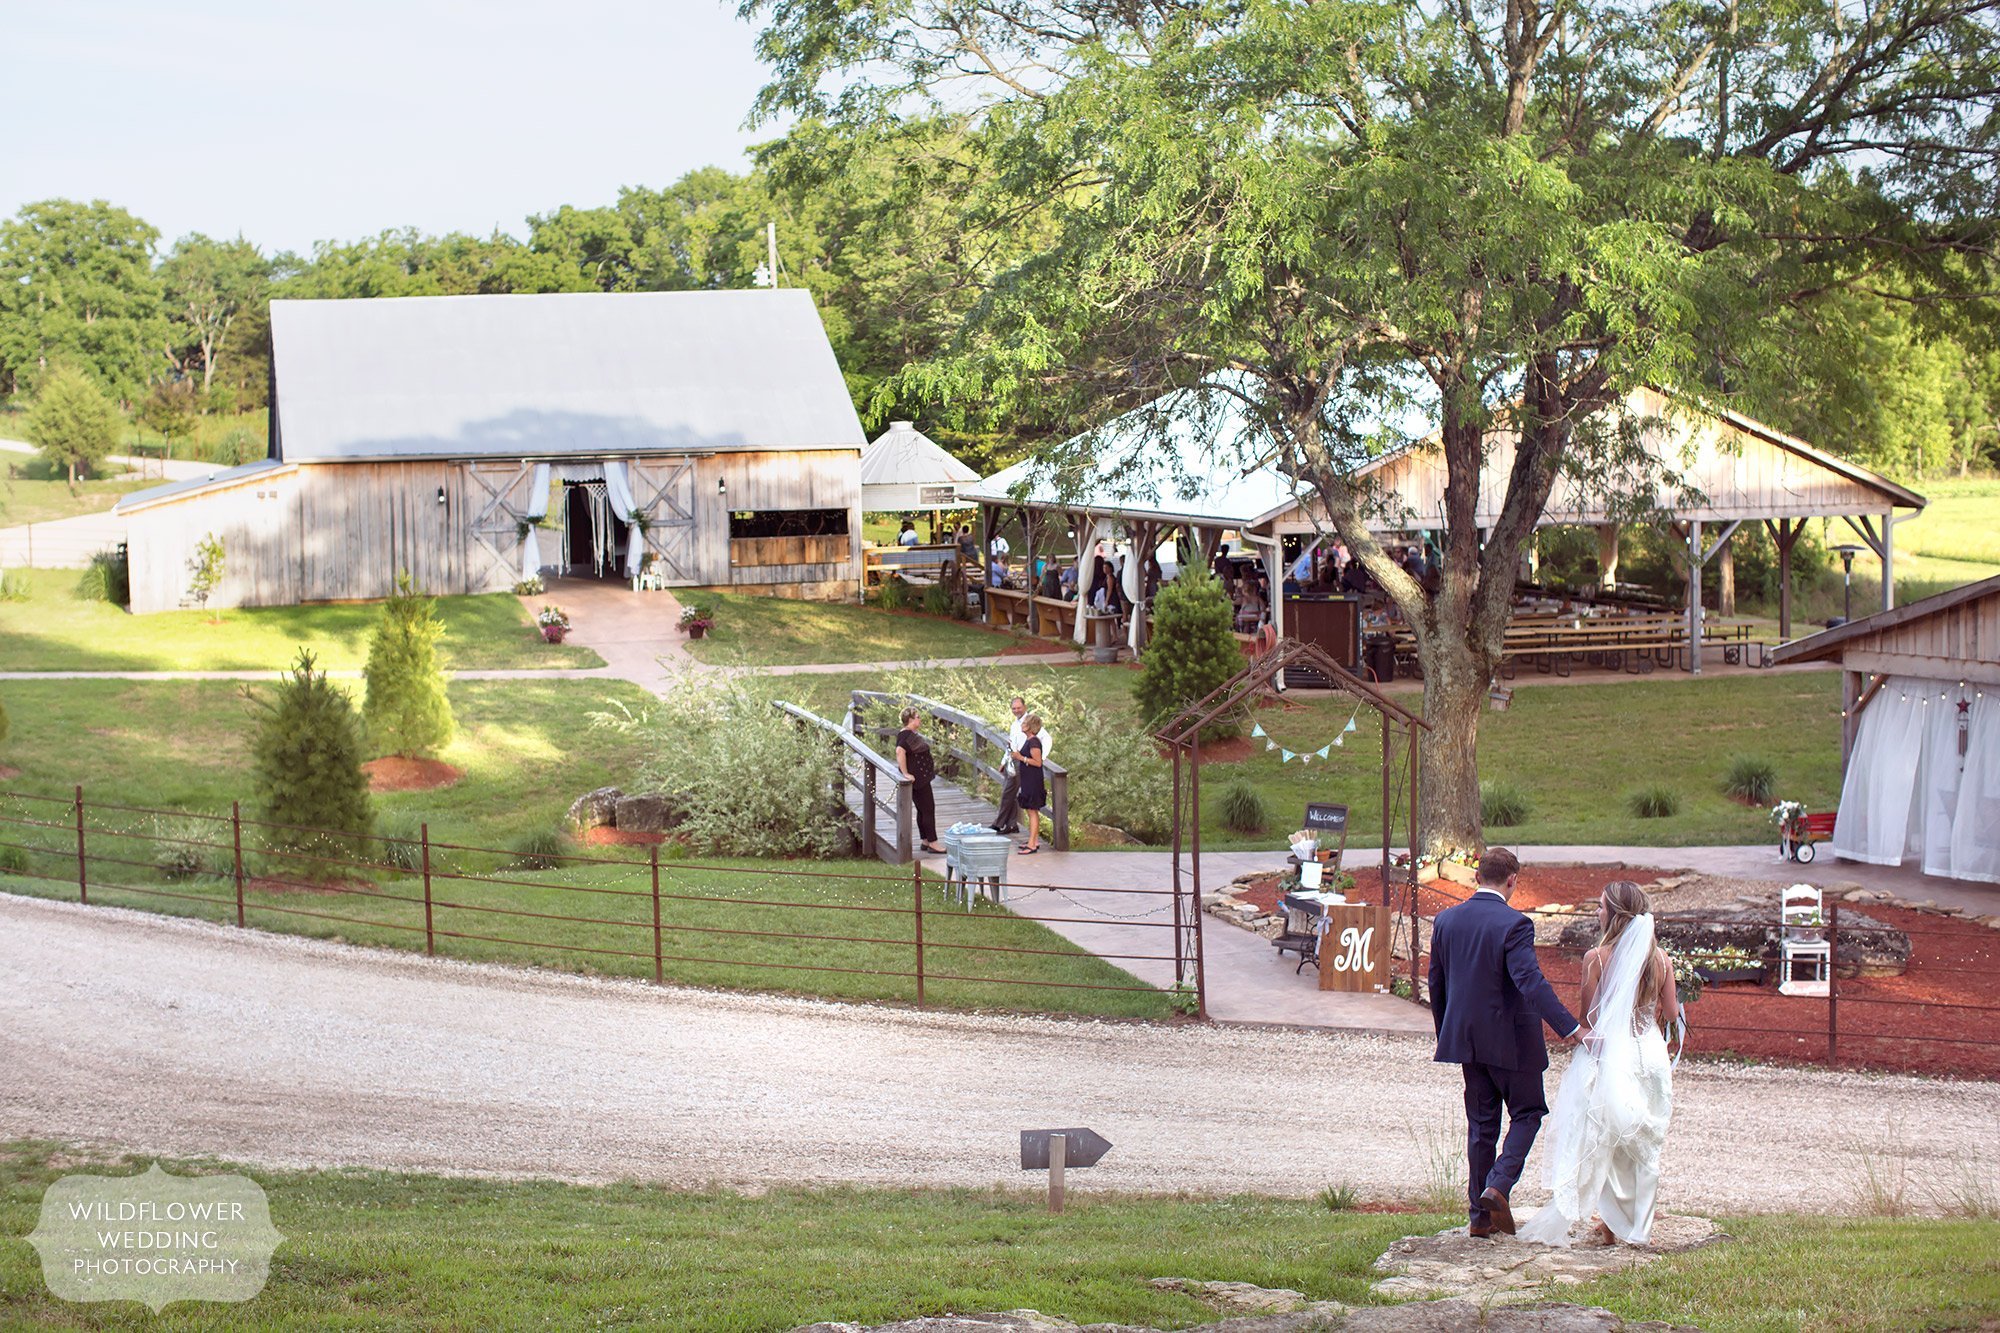 View of the country barn wedding venue with macrame and lace in southern MO.